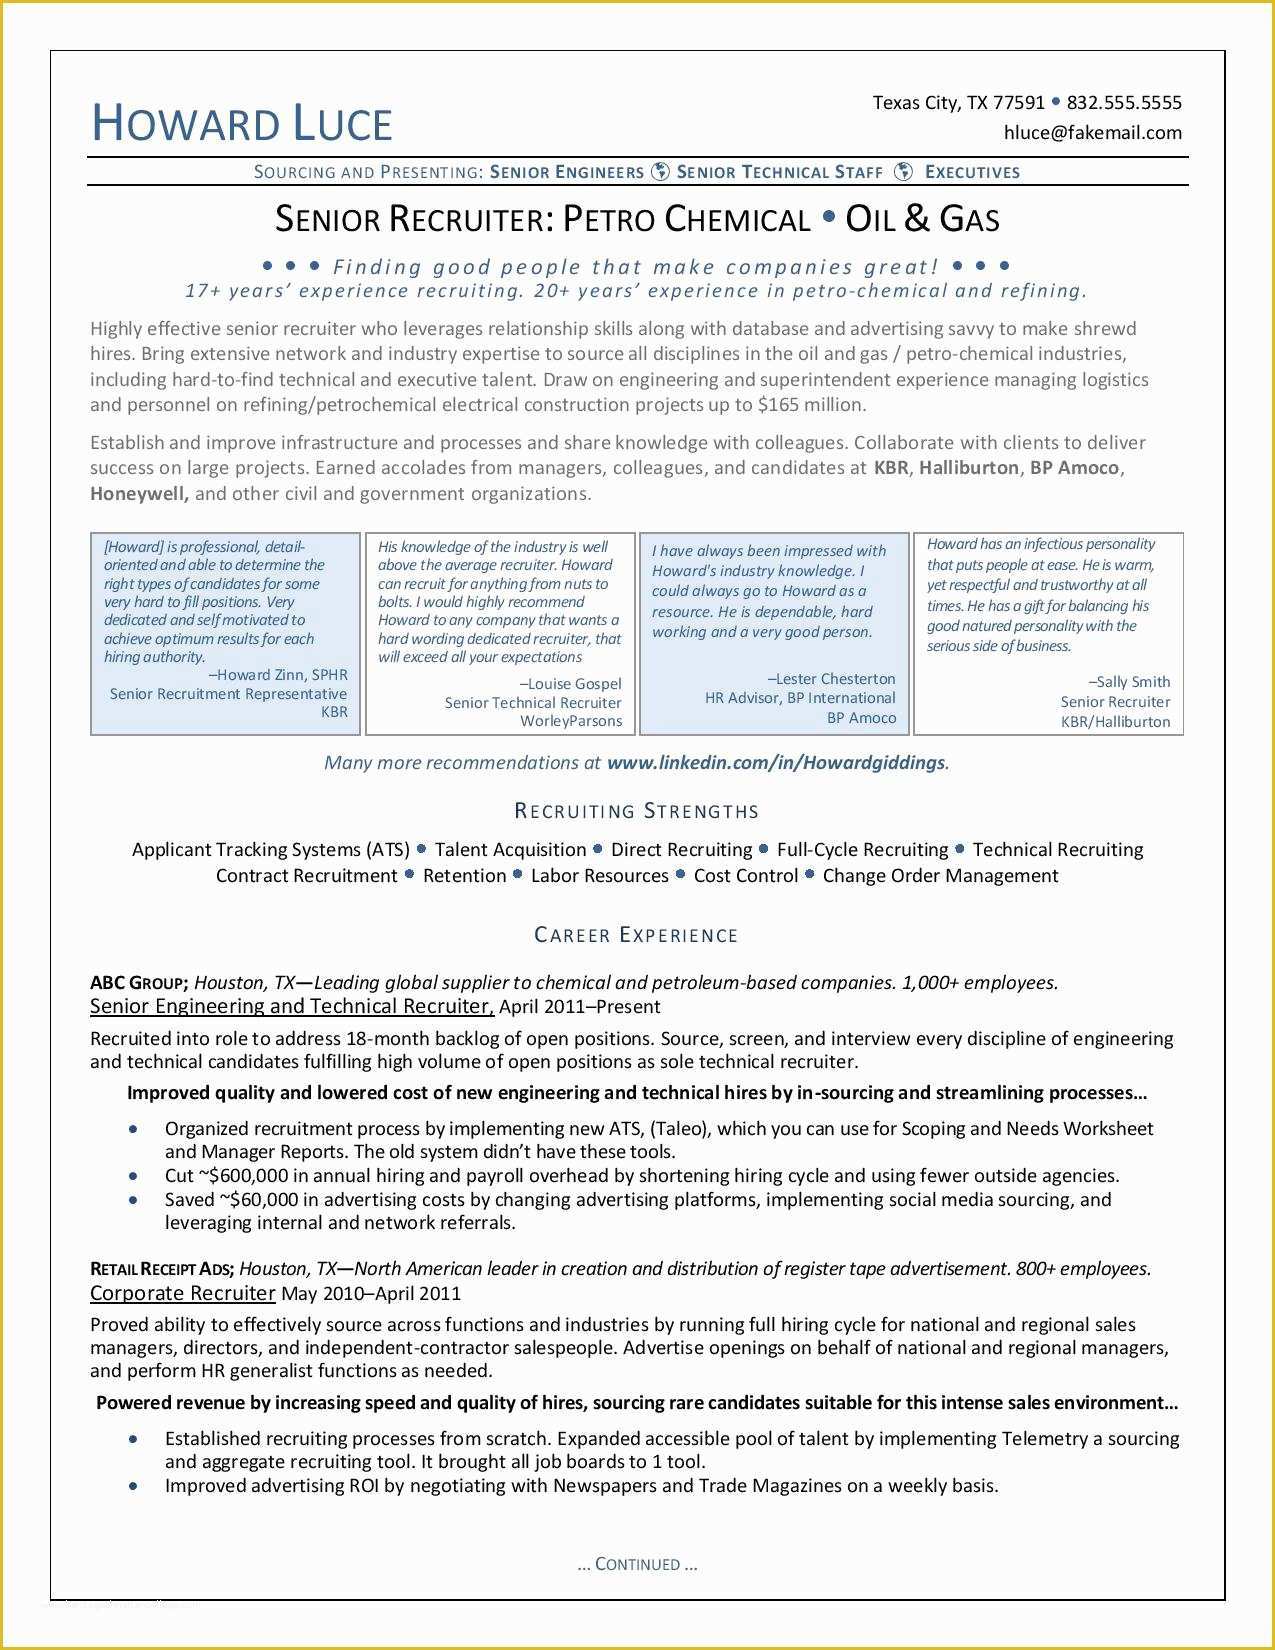 Free Oil and Gas Resume Templates Of Resumes for Oil and Gas Industry Executives This Little